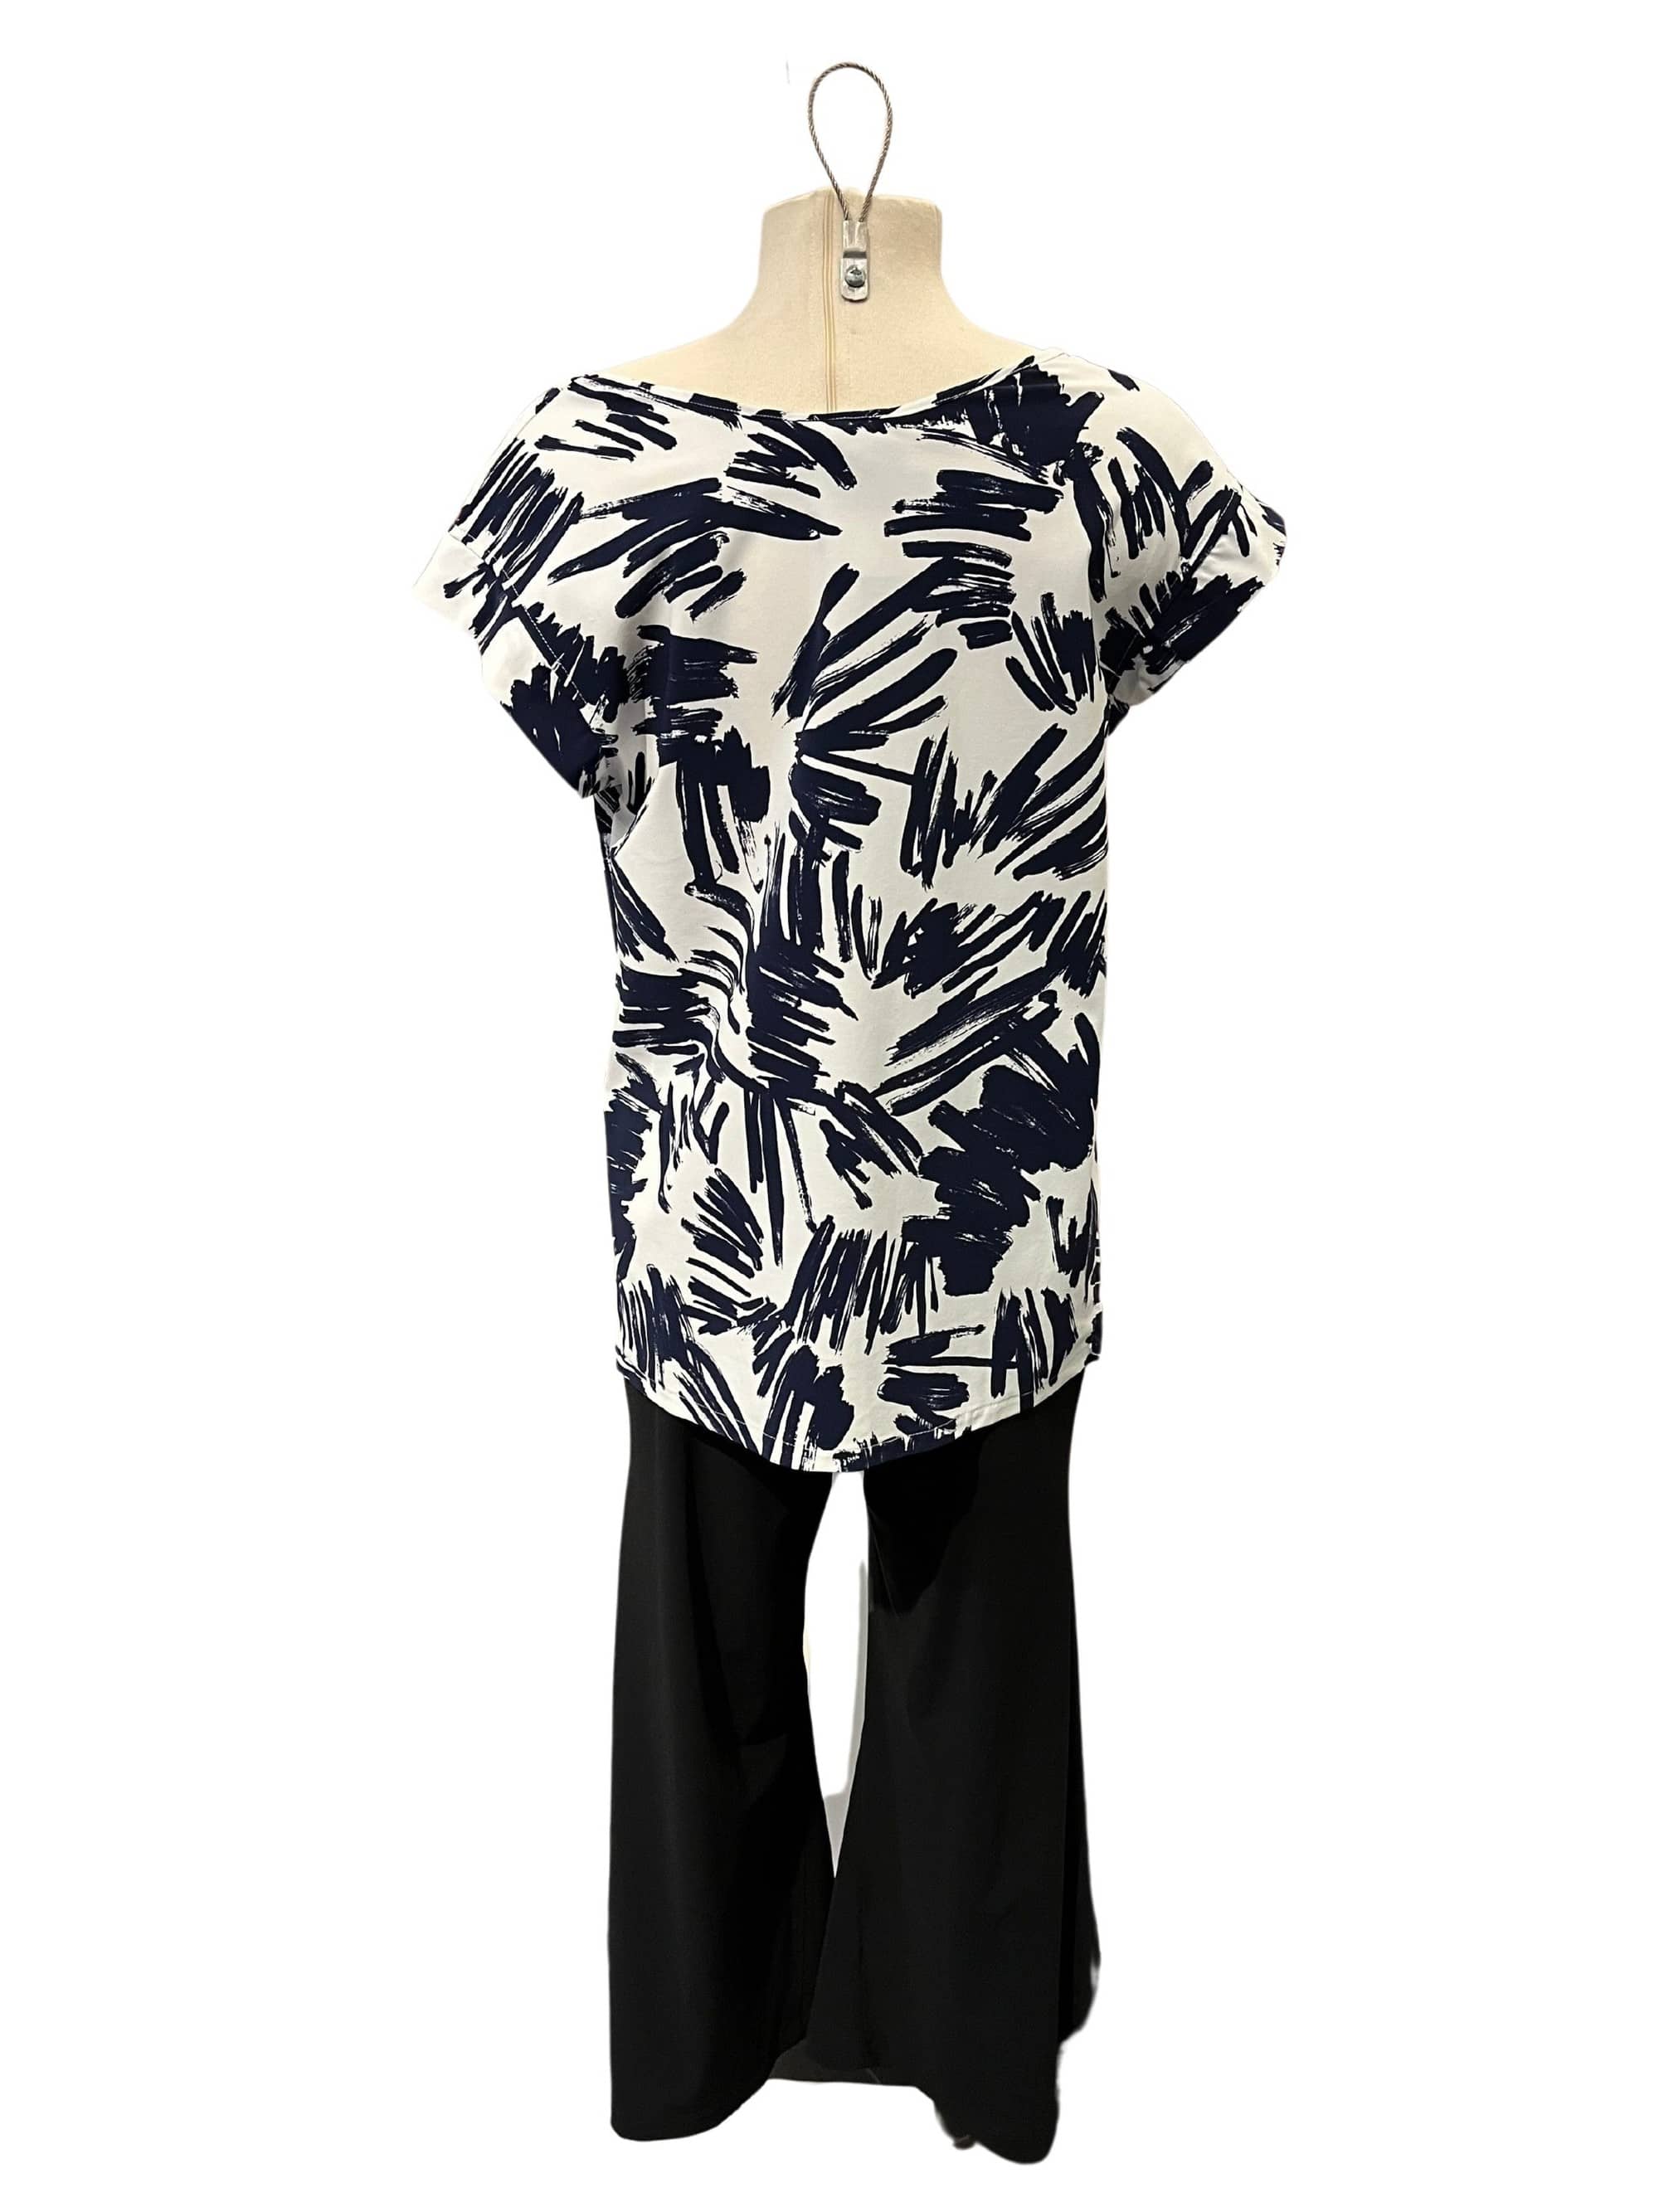 Porto Cap Sleeve in Navy and White Print - clever alice